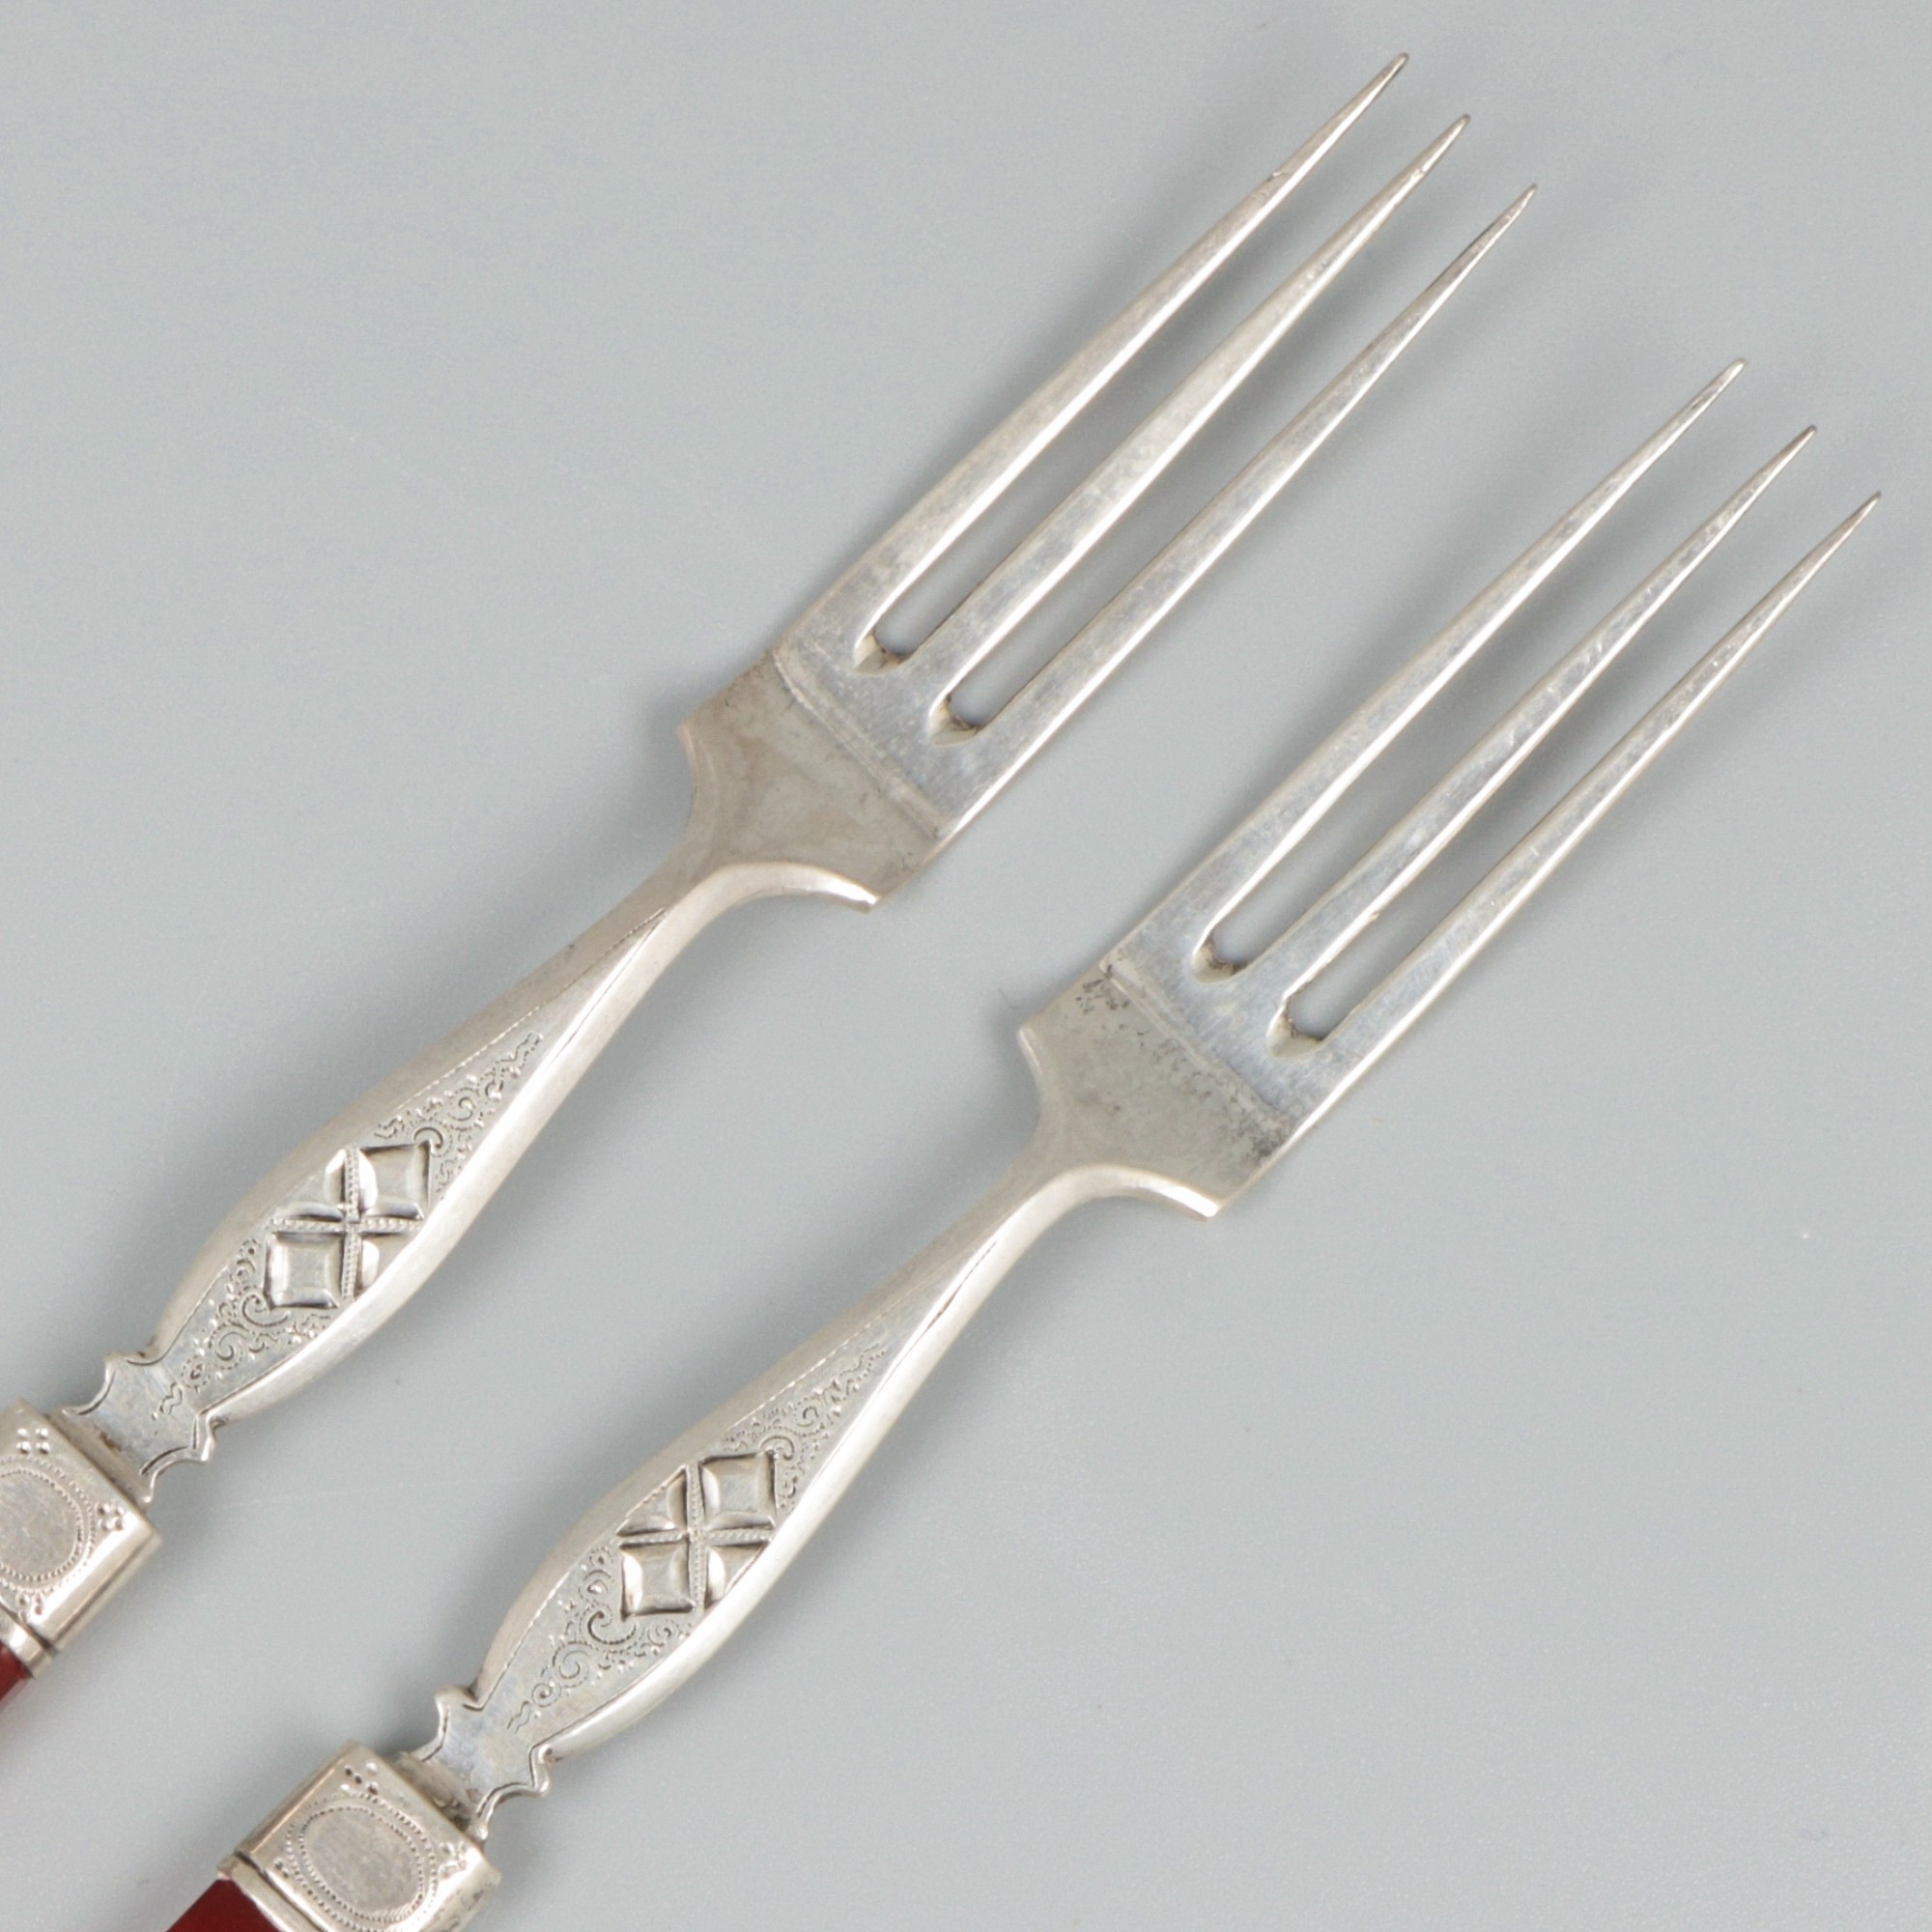 2-piece set of meat forks silver. - Image 4 of 5